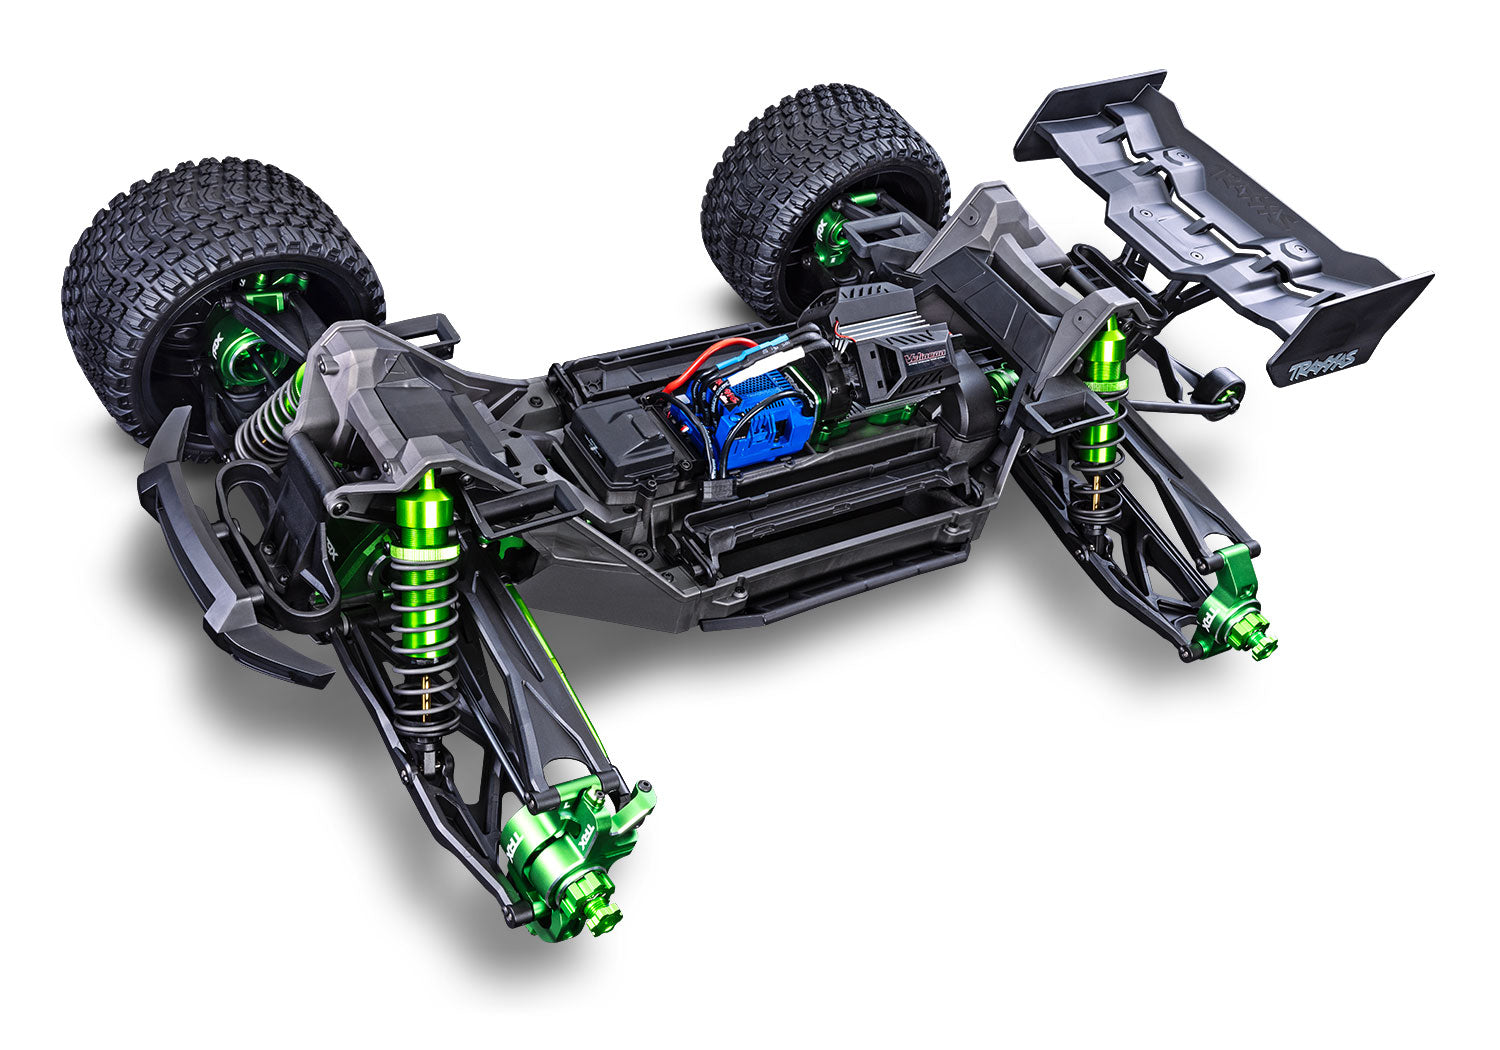 Green XRT® Ultimate: Brushless Electric Race Truck with TQi™ Traxxas Link™ Enabled 2.4GHz Radio System and Traxxas Stability Management (TSM)®